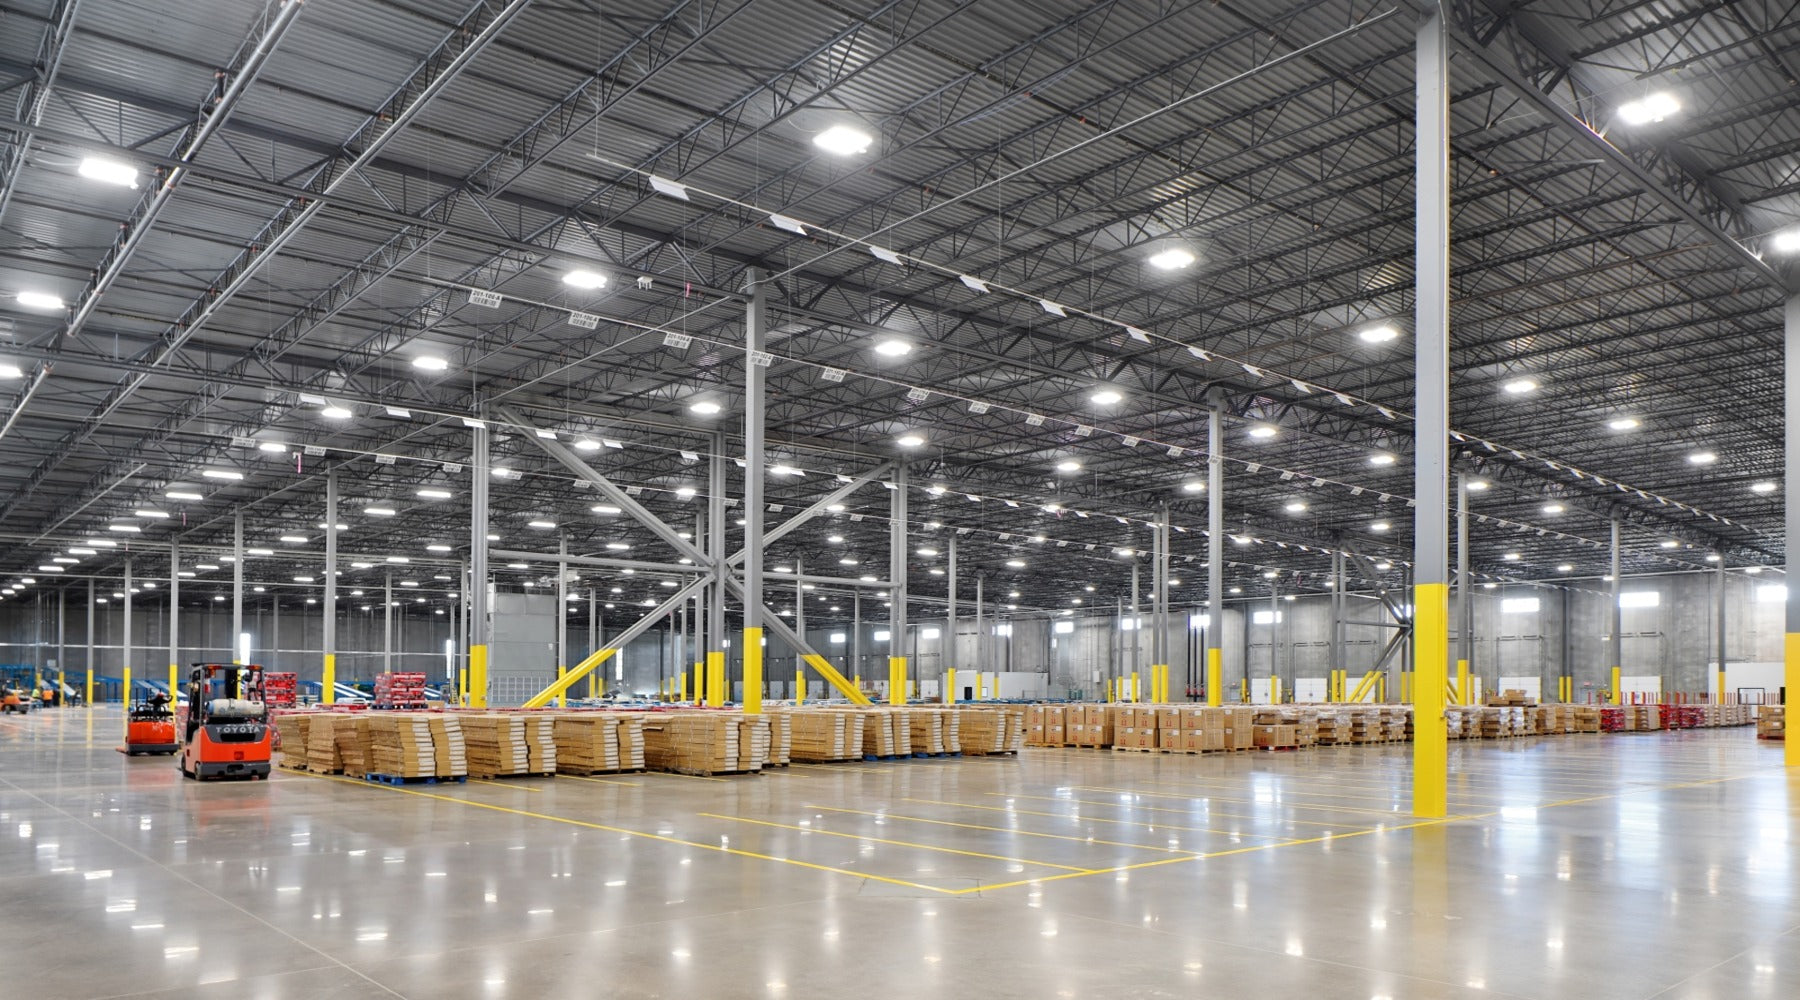 LED high bay lights installed in large storage facility